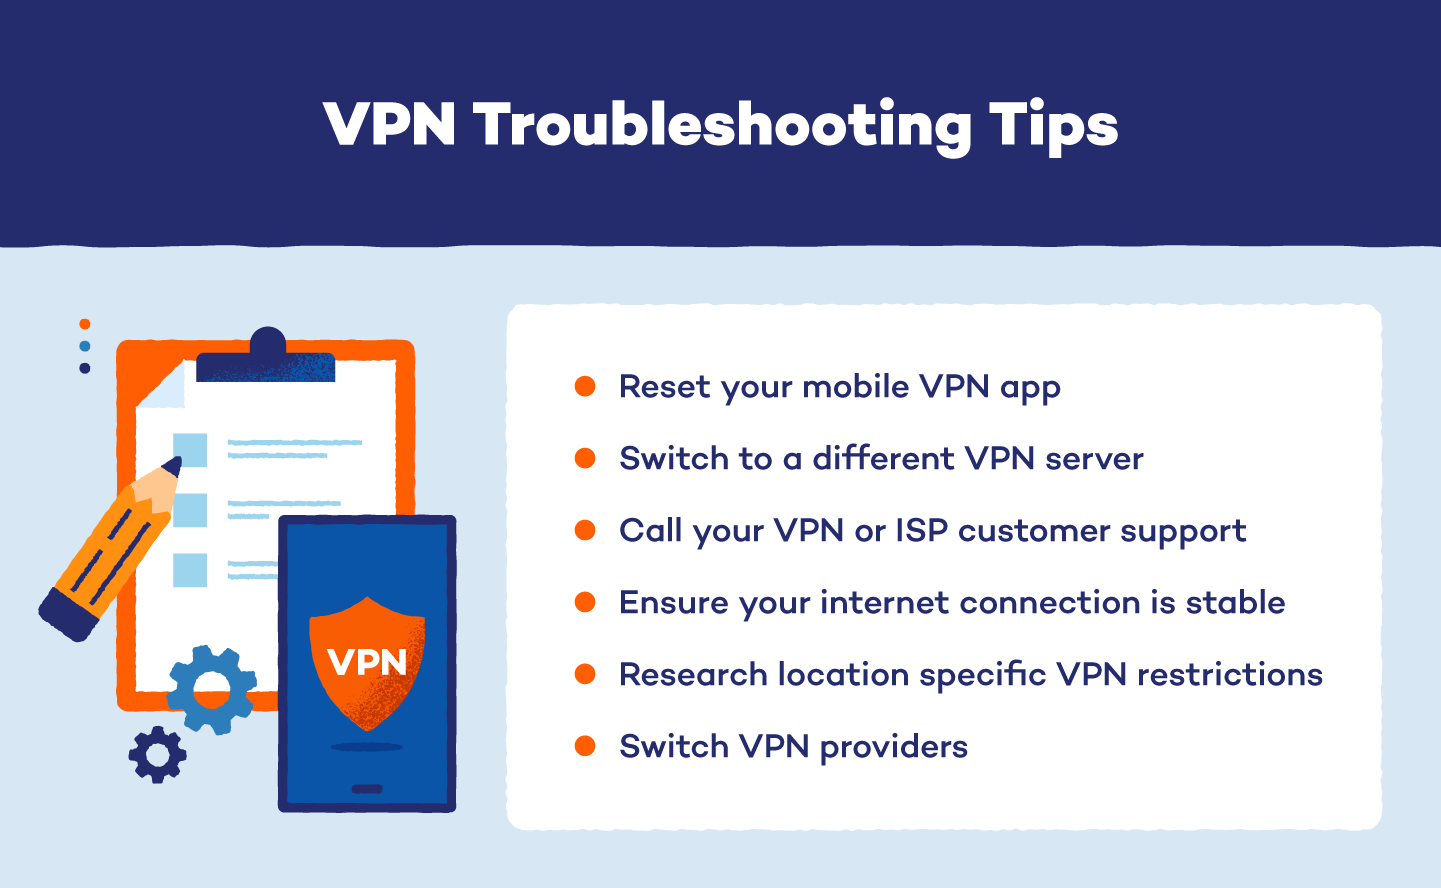 VPN Troubleshooting Tips graphic